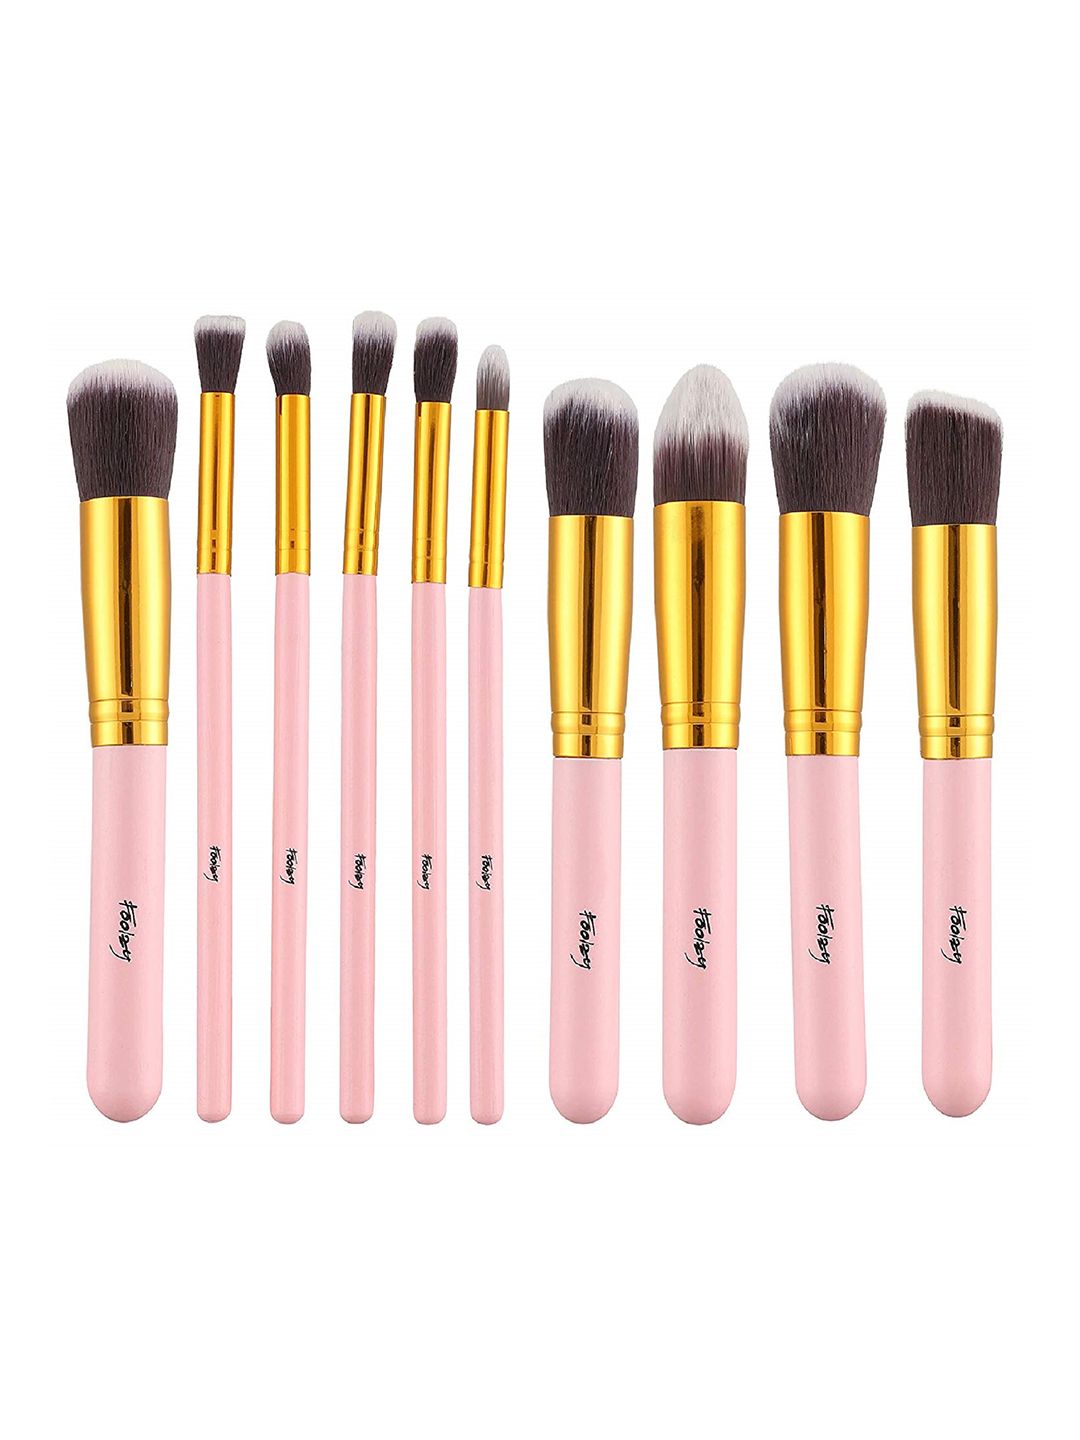 Foolzy Professional Makeup Brushes - Set of 10 - Pink Price in India